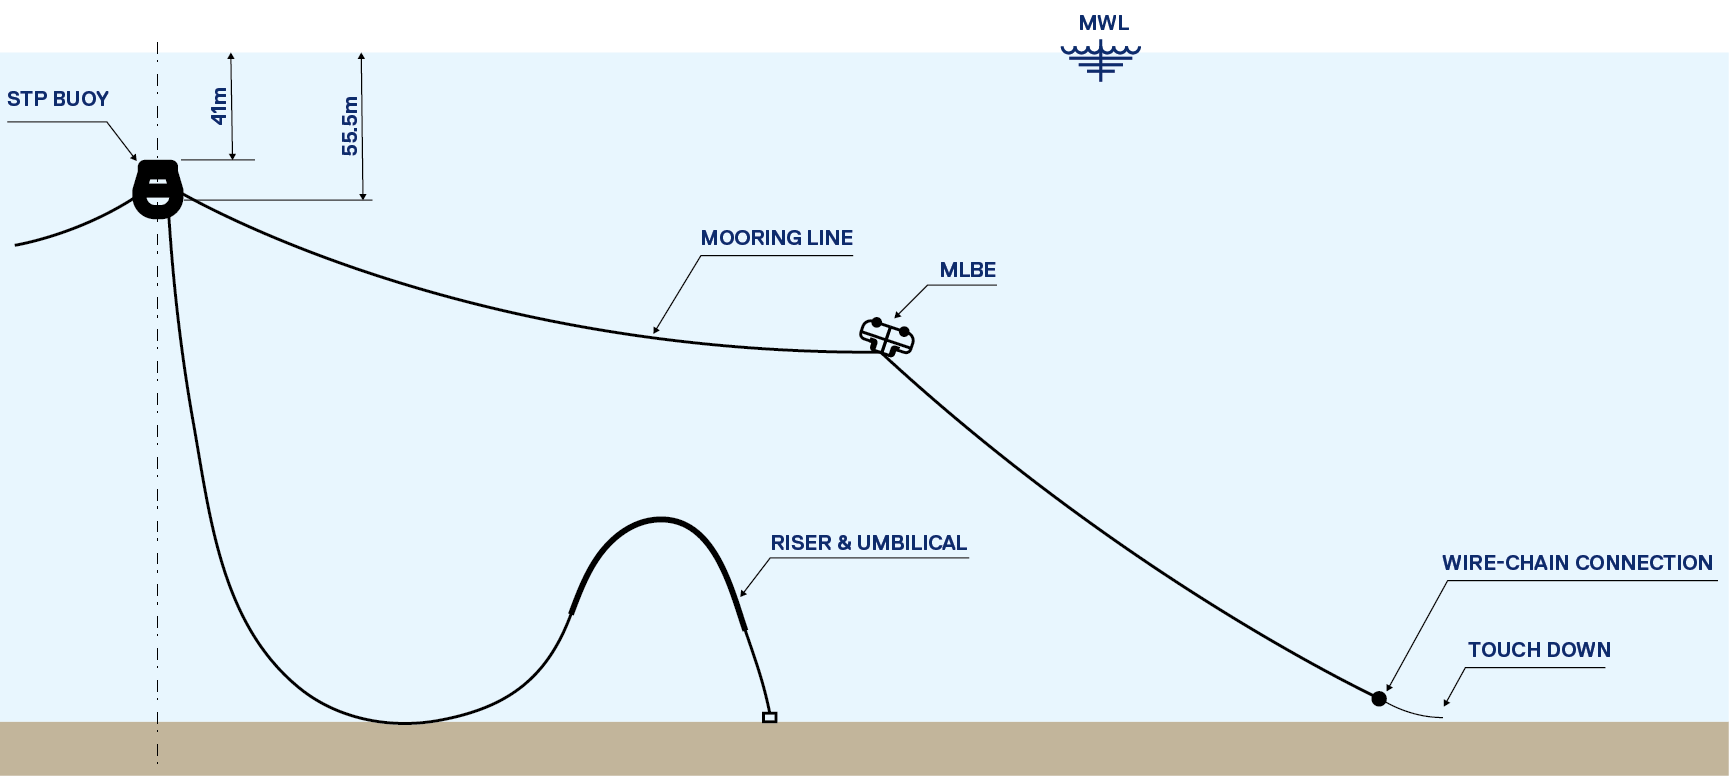 Connection of the mooring line to the STP buoy